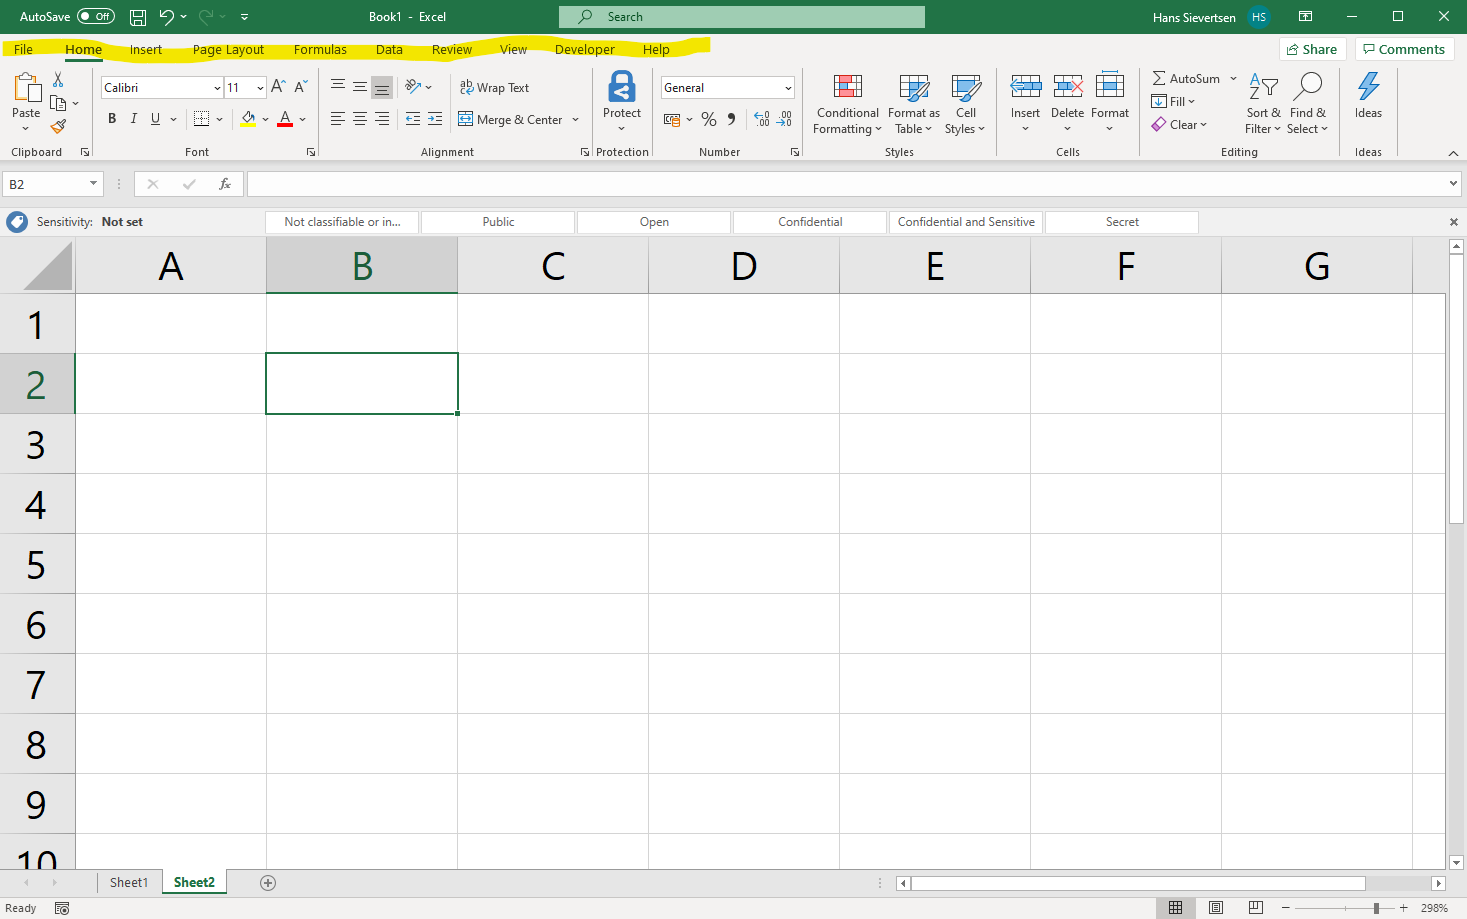 microsoft excel for students